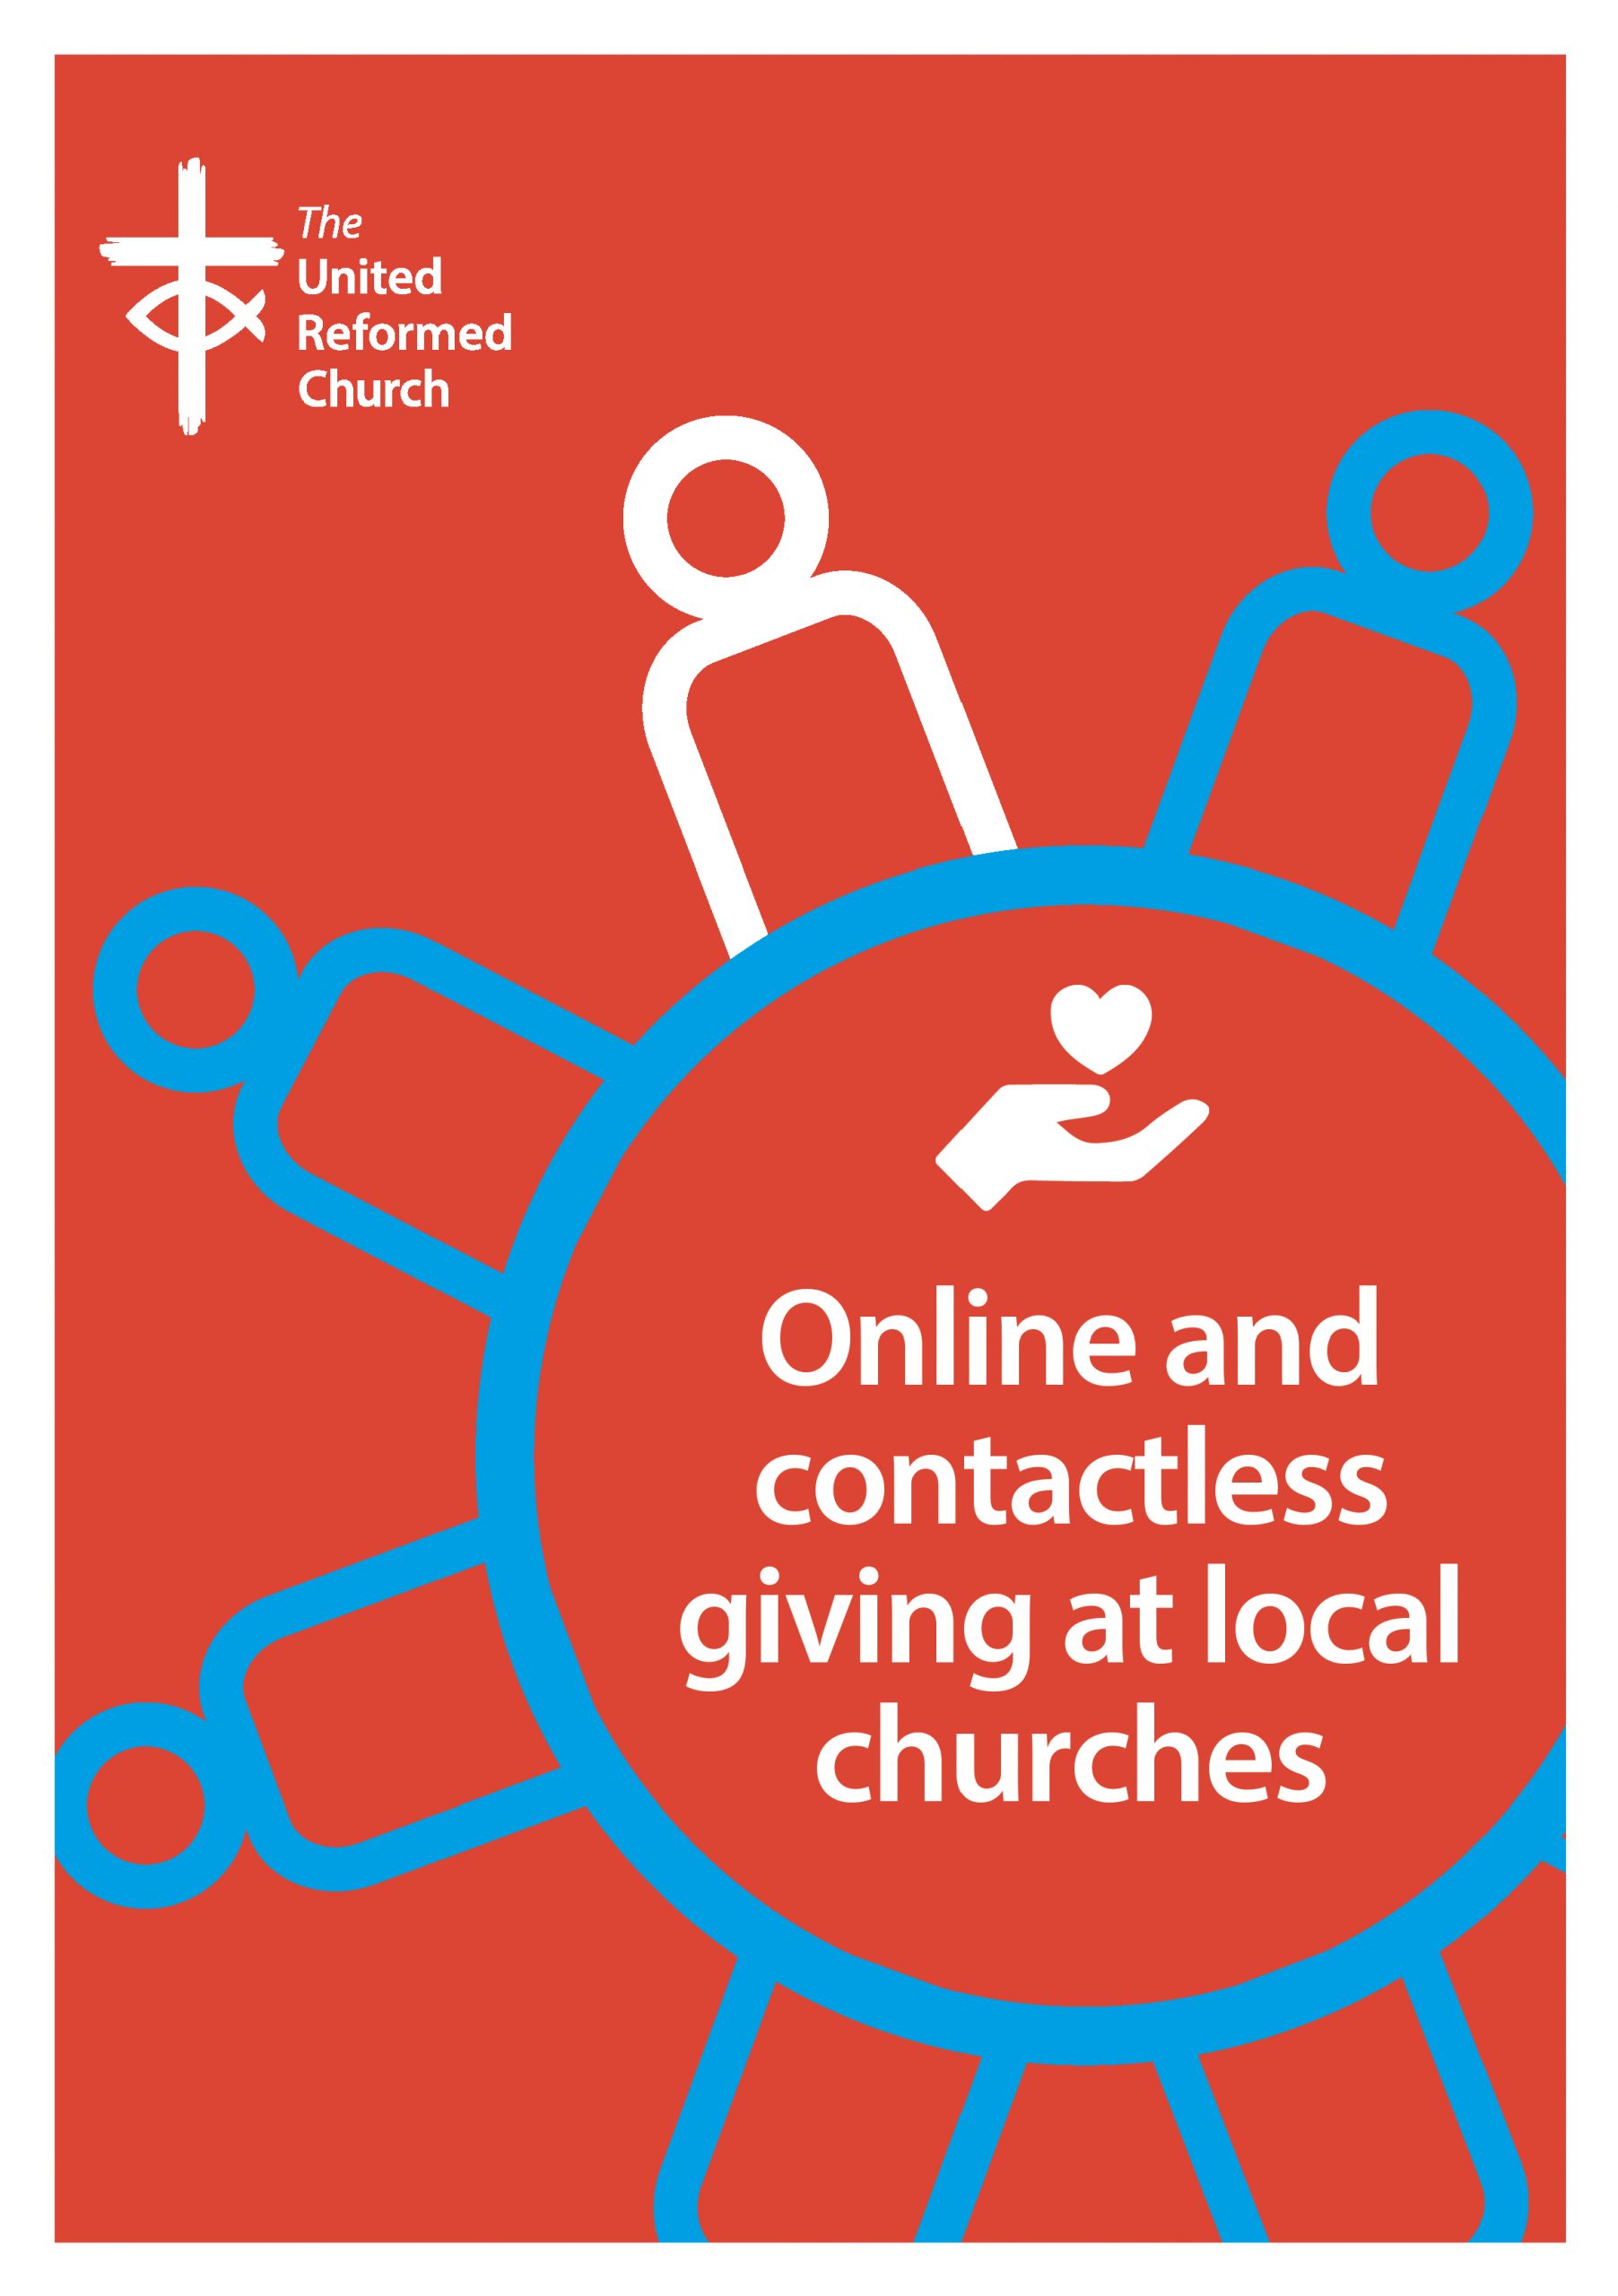 Online and contactless giving at local churches